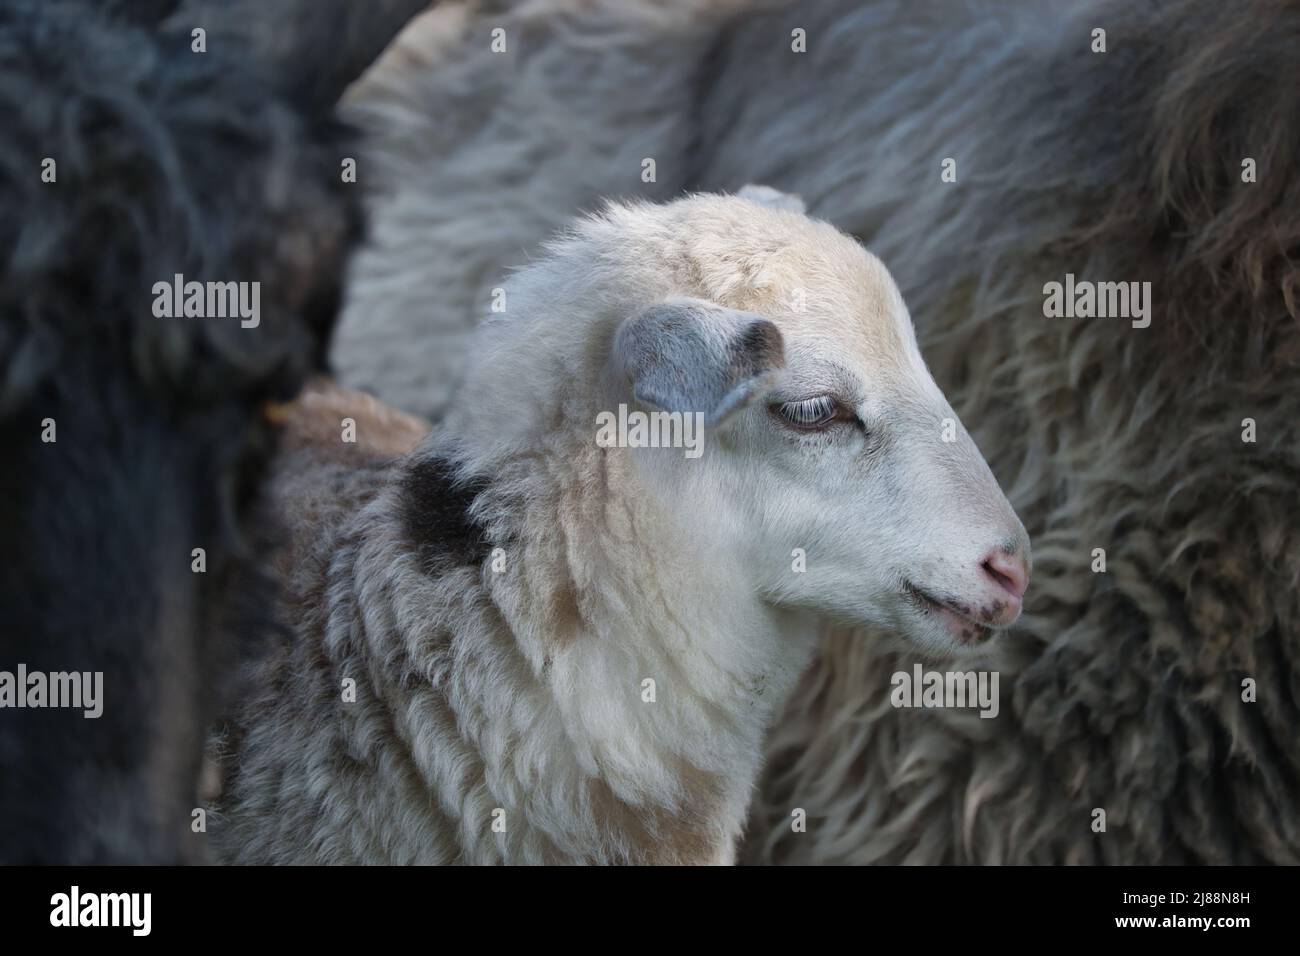 Portrait of a white-black-brown lamb in the middle of its herd. Stock Photo